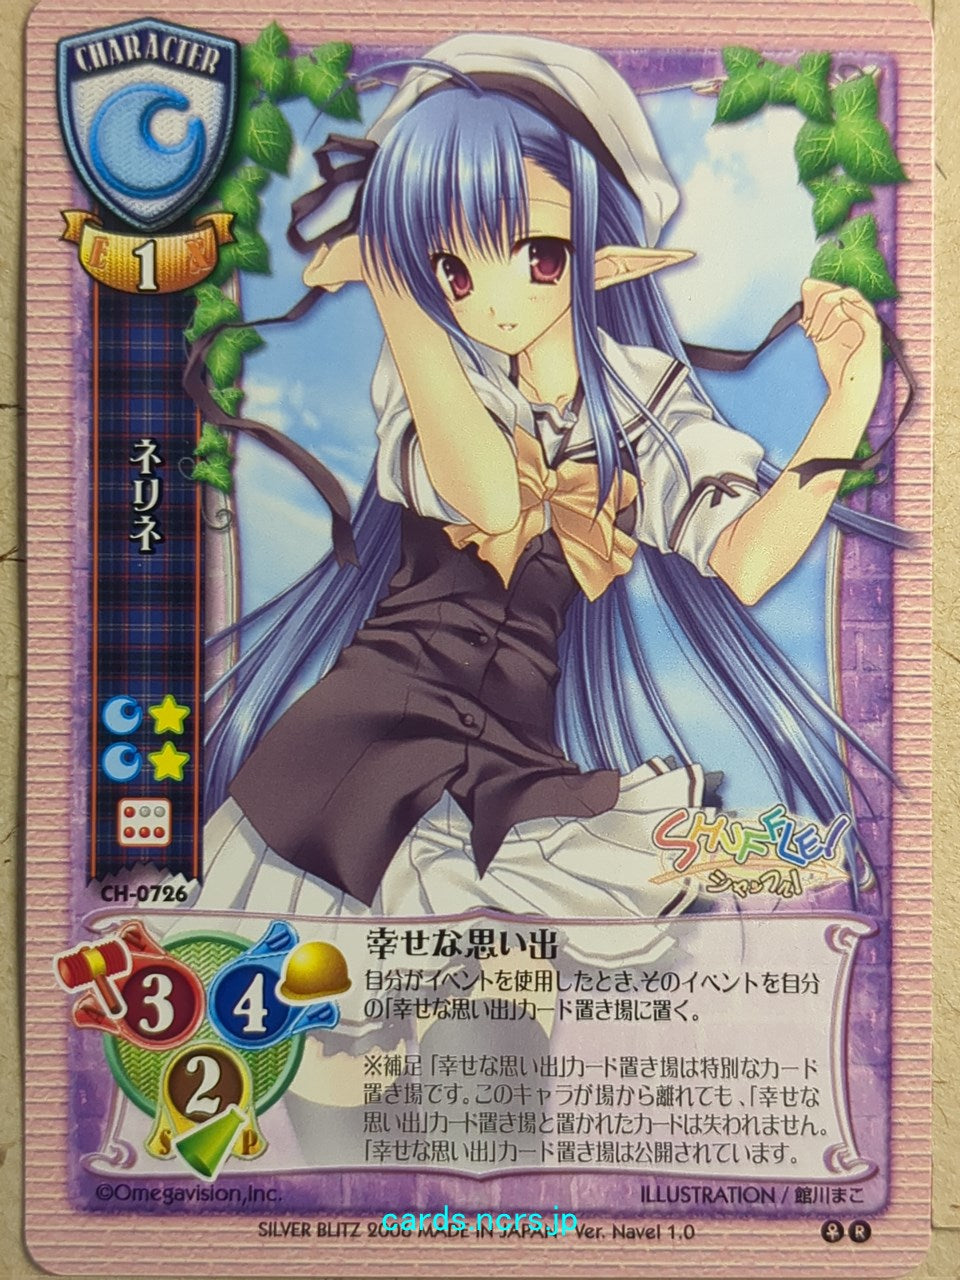 Lycee SHUFFLE! -Nerine-   Trading Card LY/CH-0726